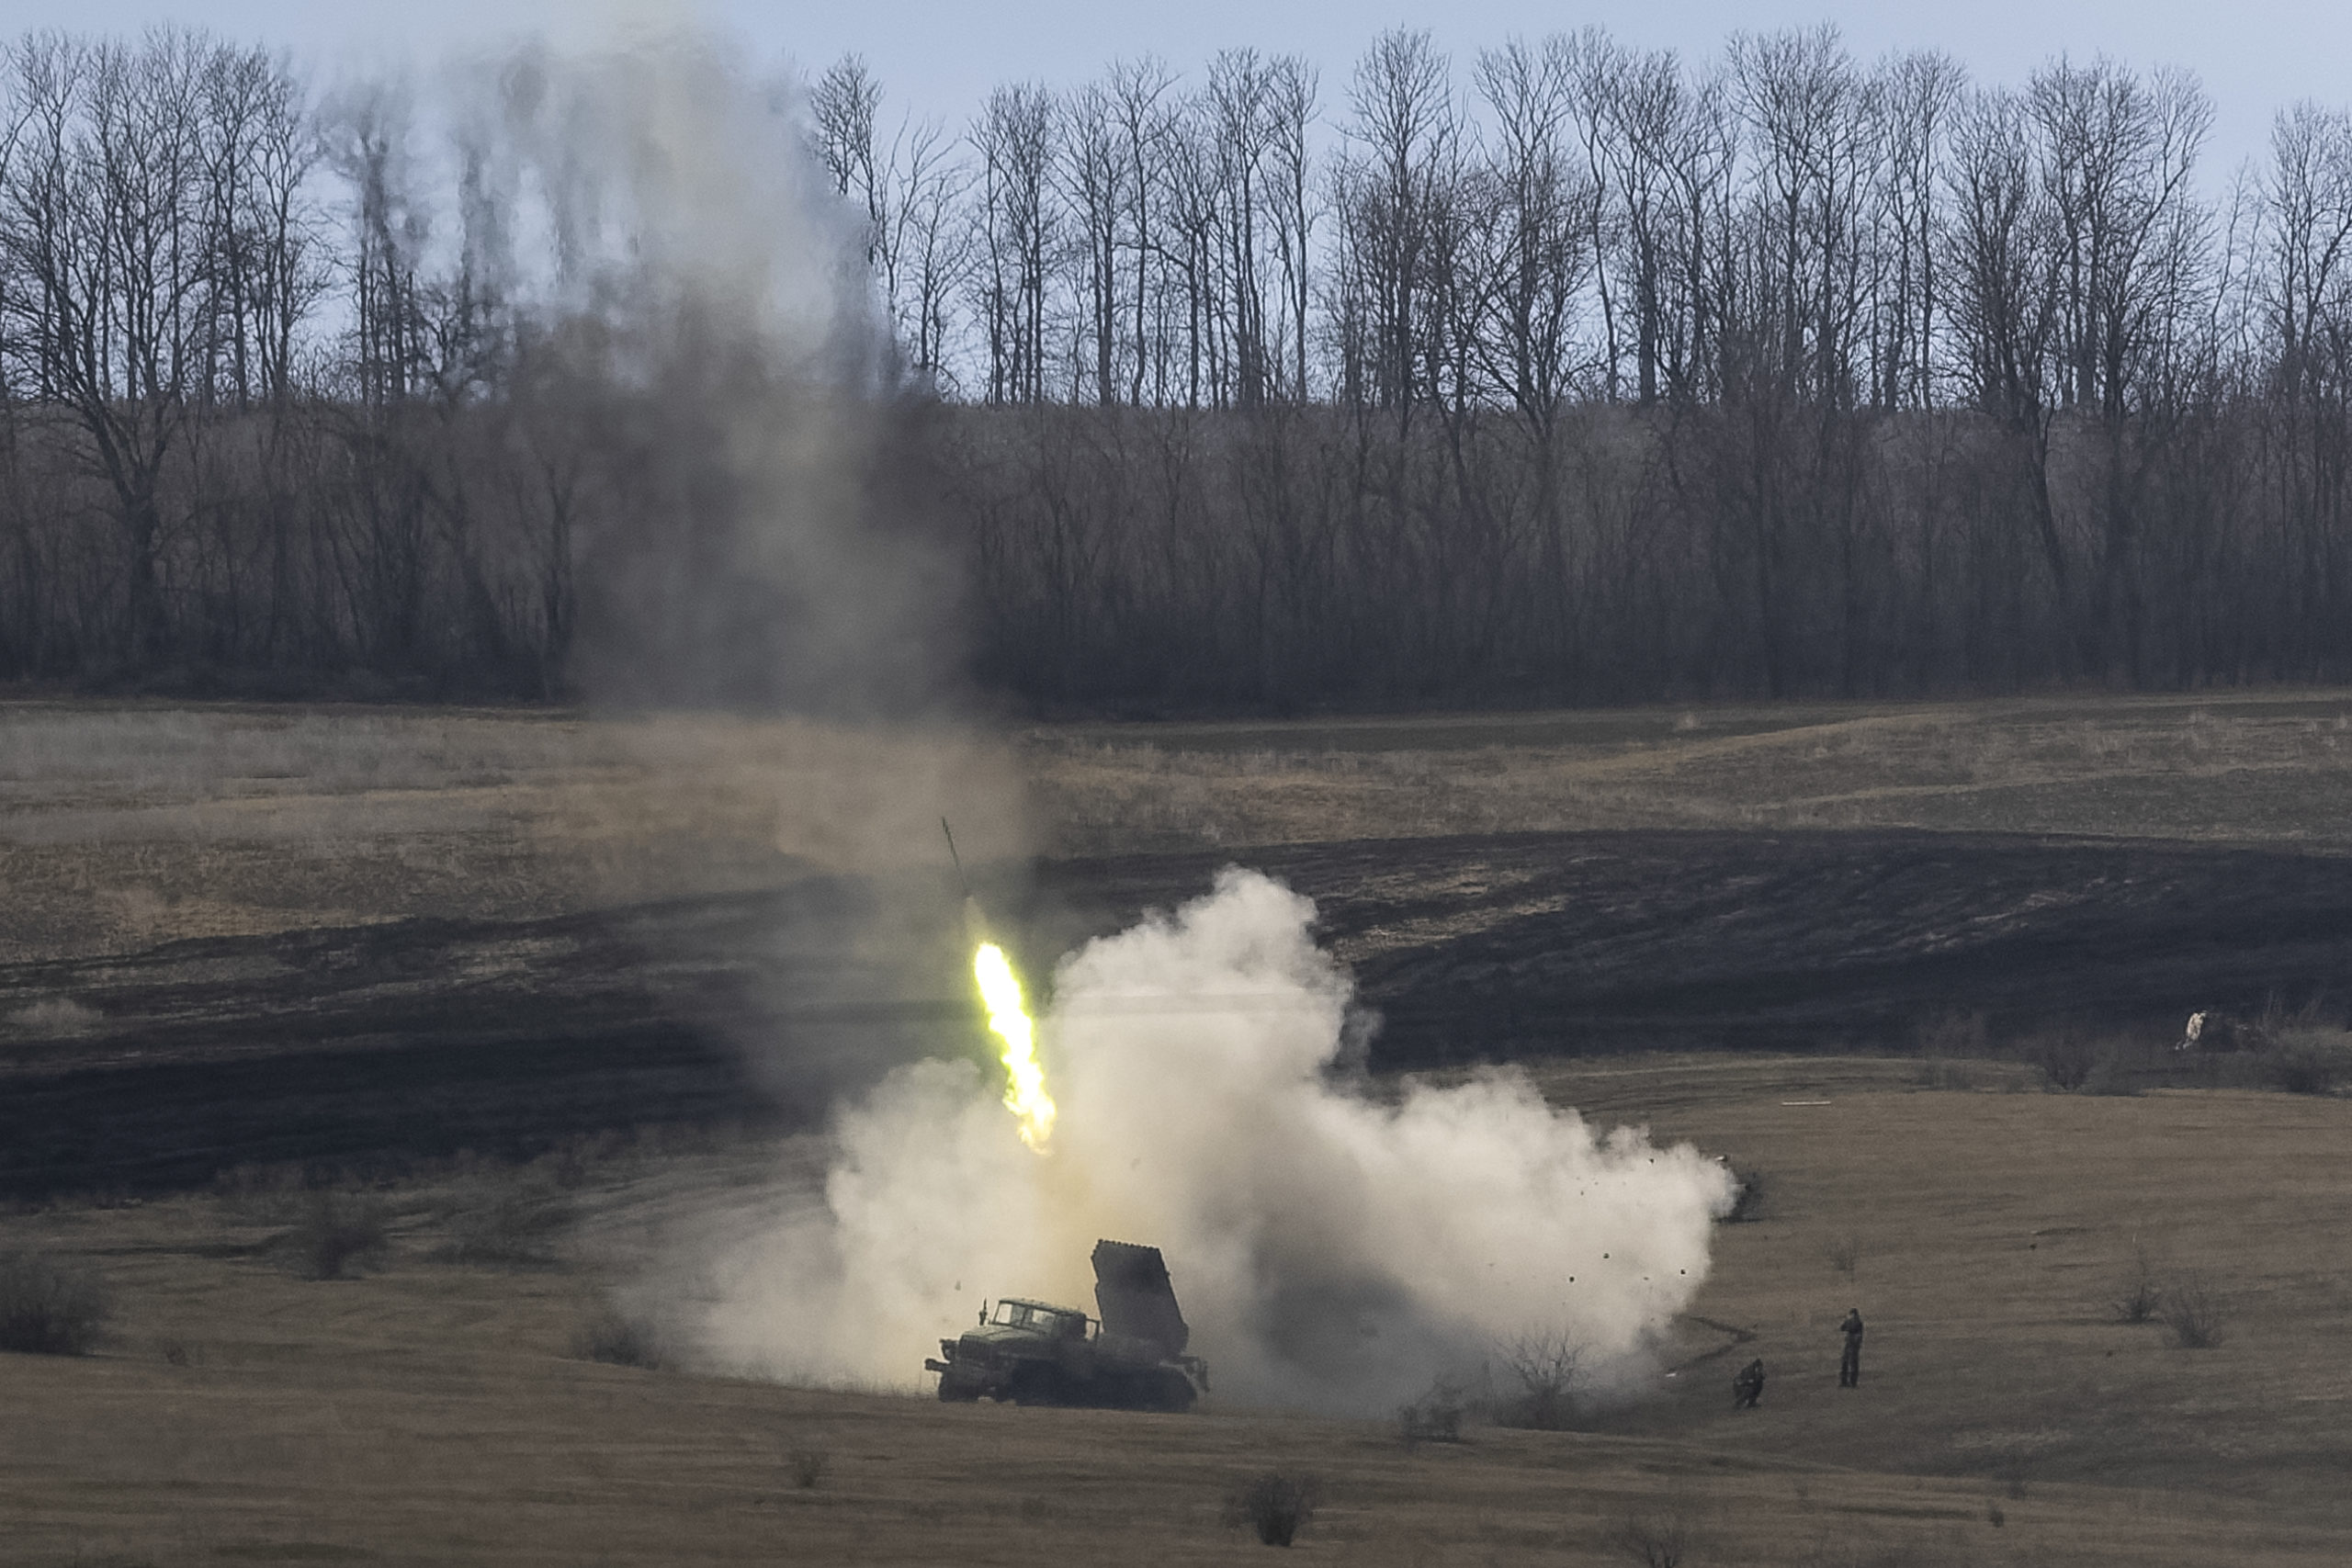 DONETSK REGION, UKRAINE - MARCH 02: Ukrainian Army troops fire BM-21 "Grad" rockets at Russian positions on March 02, 2023 in the Donetsk Region of eastern Ukraine. Last February, Russia's military invaded Ukraine from three sides and launched airstrikes across the country. Since then, Moscow has withdrawn from north and central parts of Ukraine, focusing its assault on the eastern Donbas region, where it had supported a separatist movement since 2014.